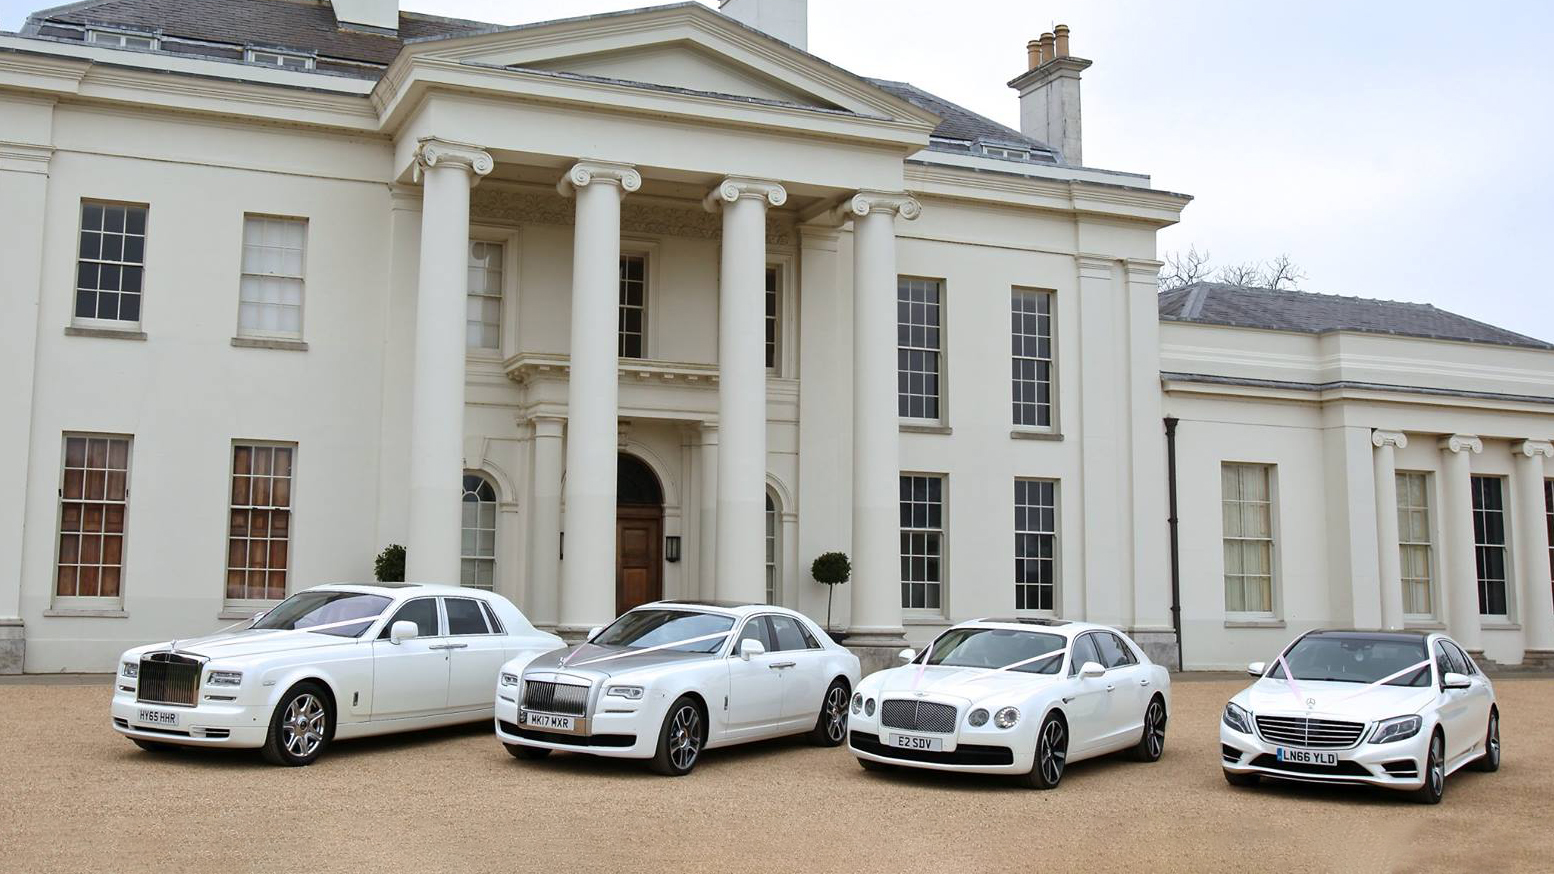 Selection of four white modern wedding cars in front of a local Hatfield venue decorated with matching white ribbons. Two Rolls-Royce on the left, a Bentley and a white Mercedes on